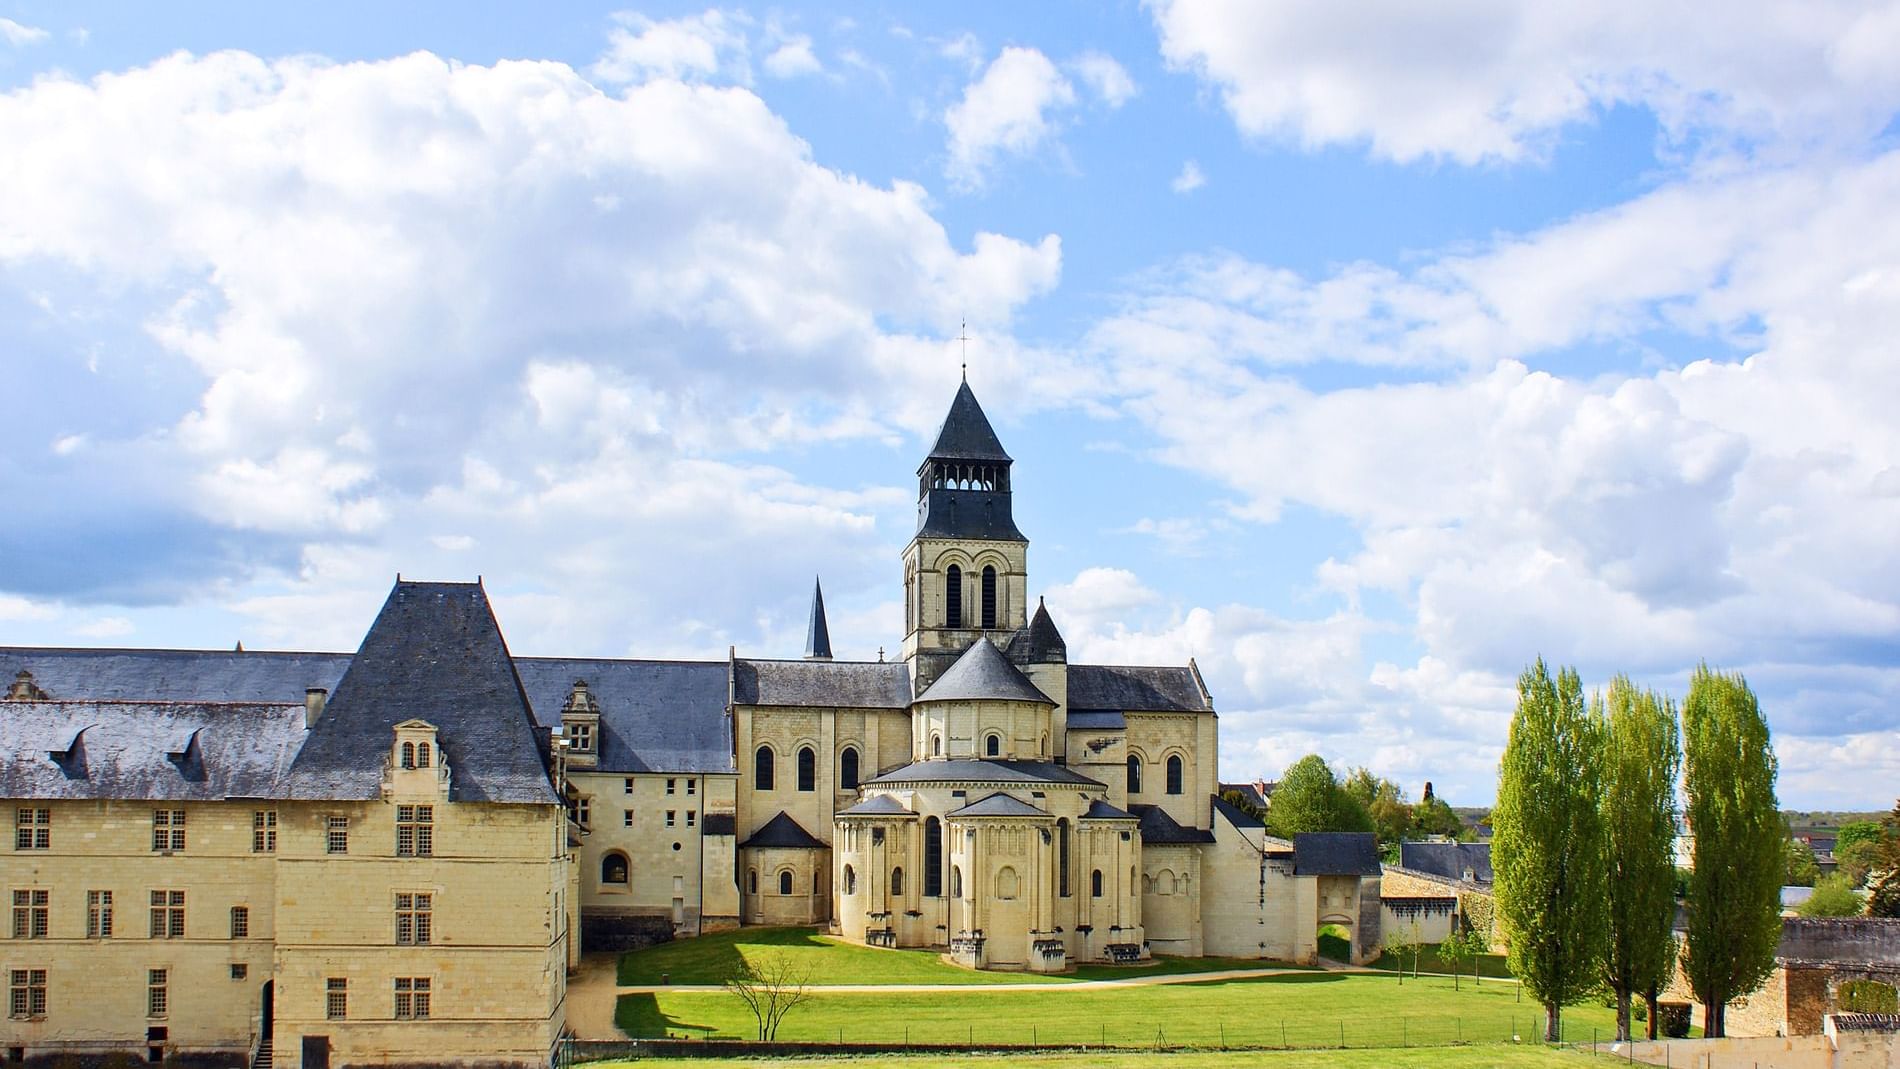 View of The Royal Abbey of Fontevraud near the Originals Hotels